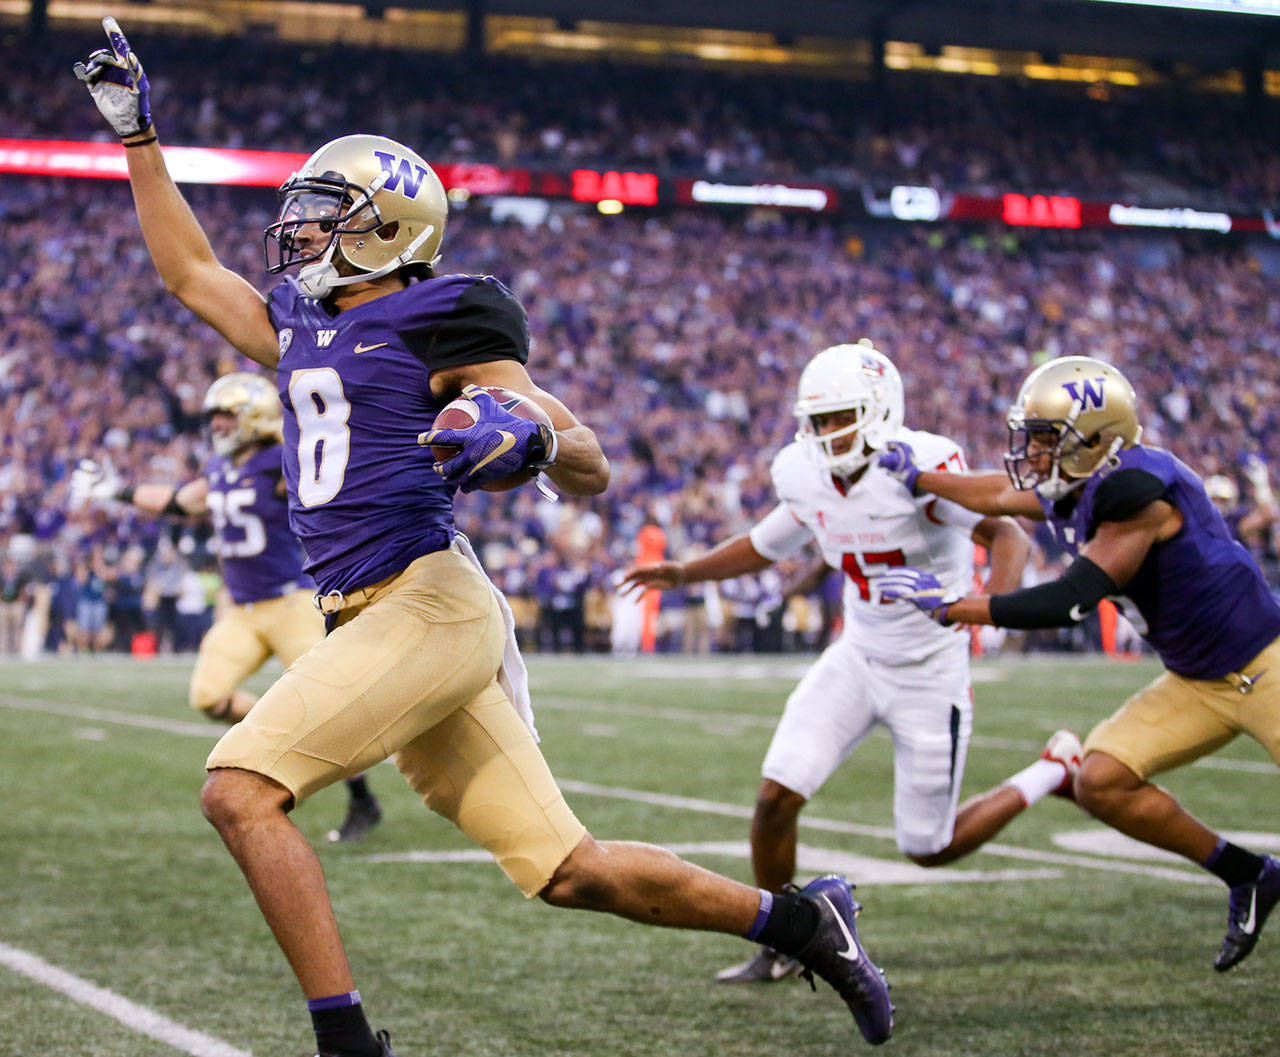 Washington’s Dante Pettis celebrates his punt return for a touchdown against Fresno State on Sept. 16, 2017, at Husky Stadium in Seattle. (Kevin Clark / The Herald)